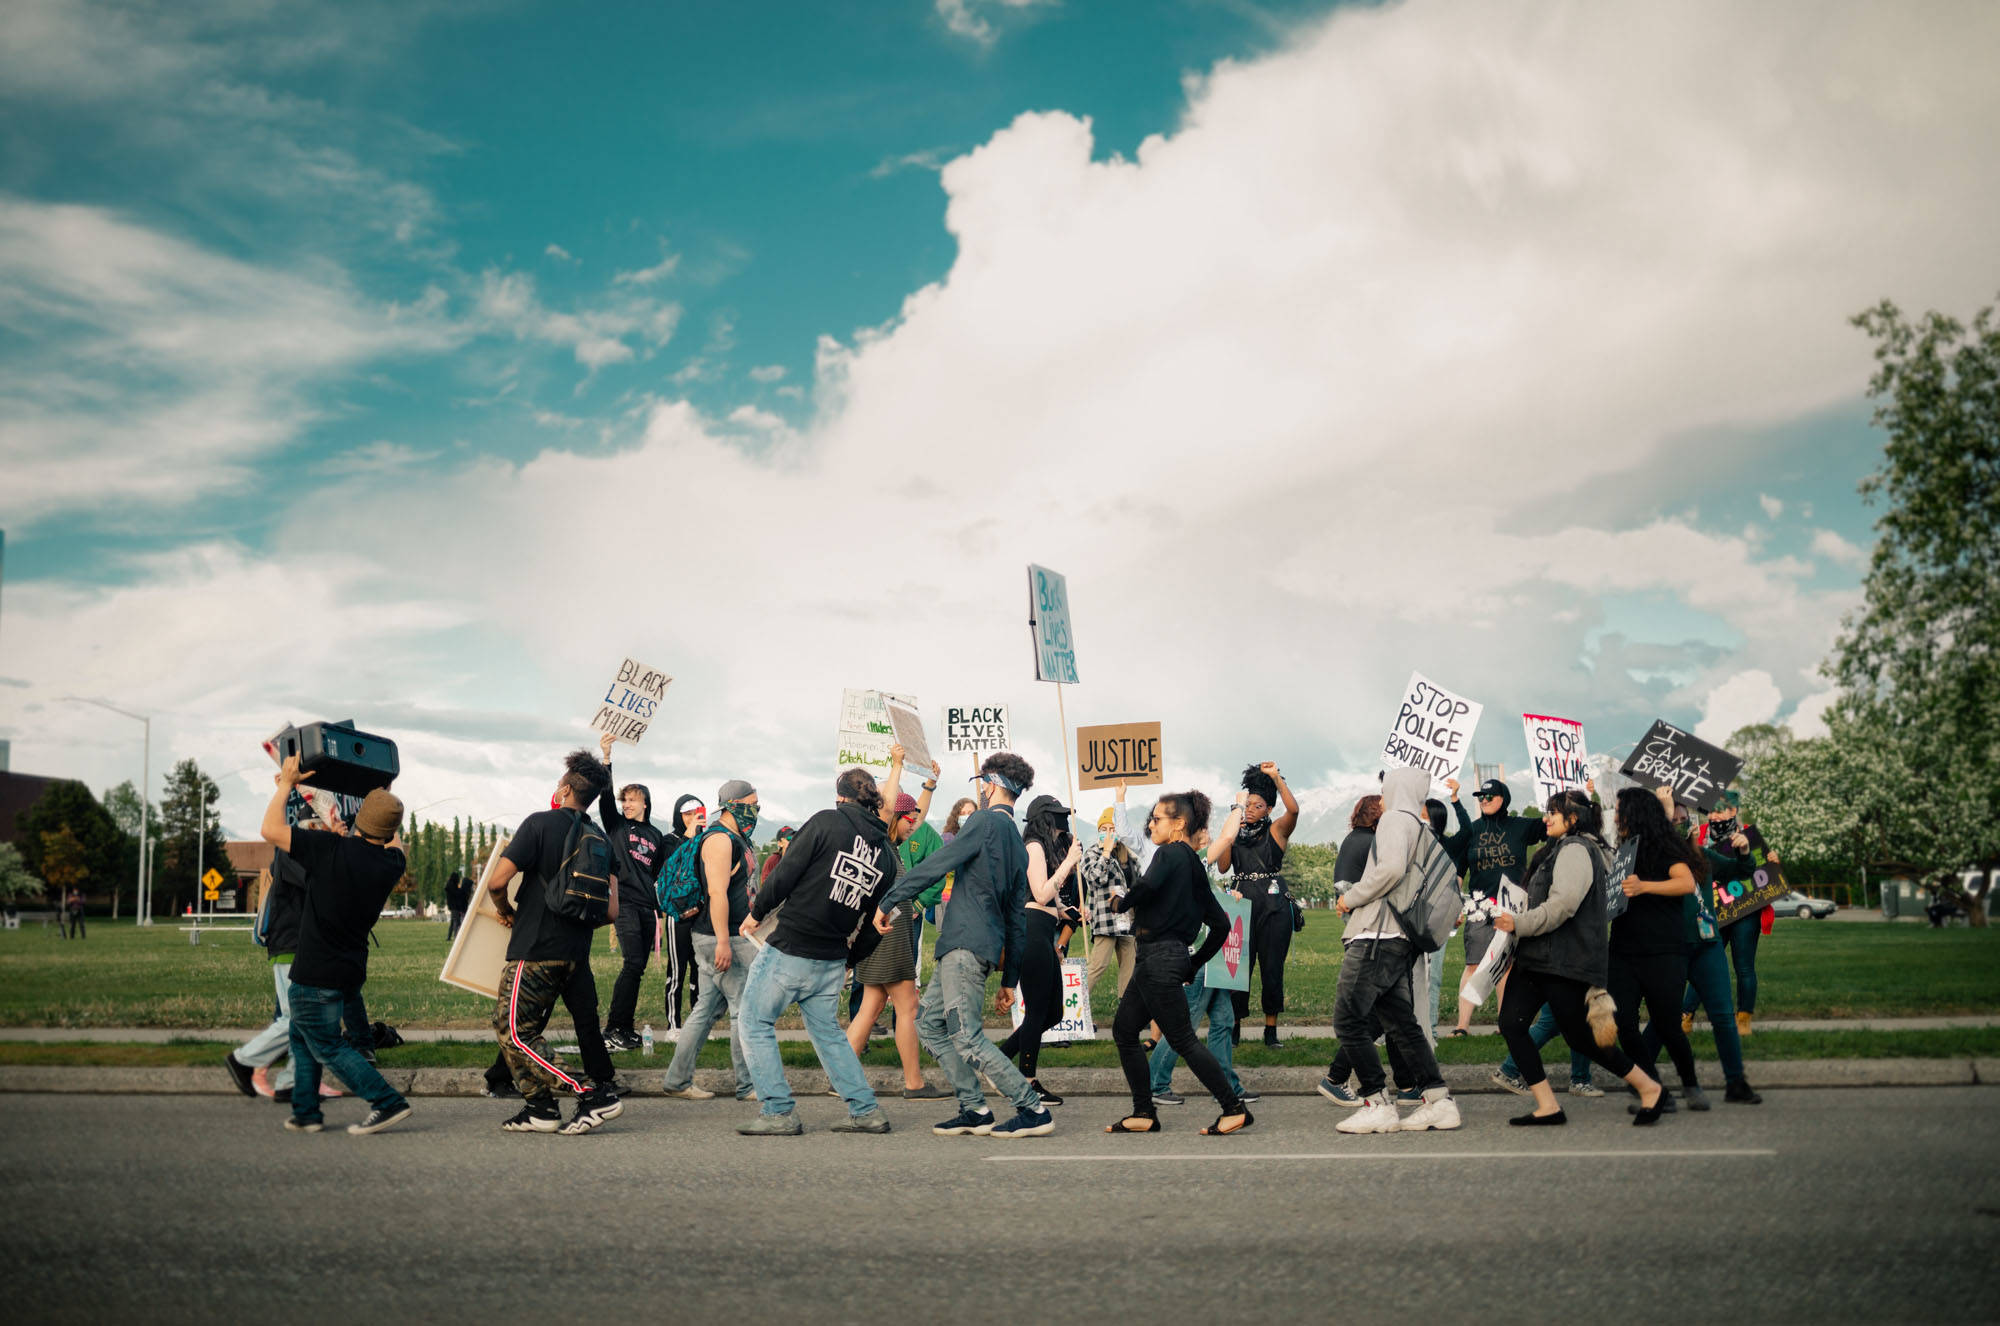 Photo by Joshua Albeza Branstetter 
A group dances in the street during a Black Lives Matter protest in Anchorage in the summer of 2020.